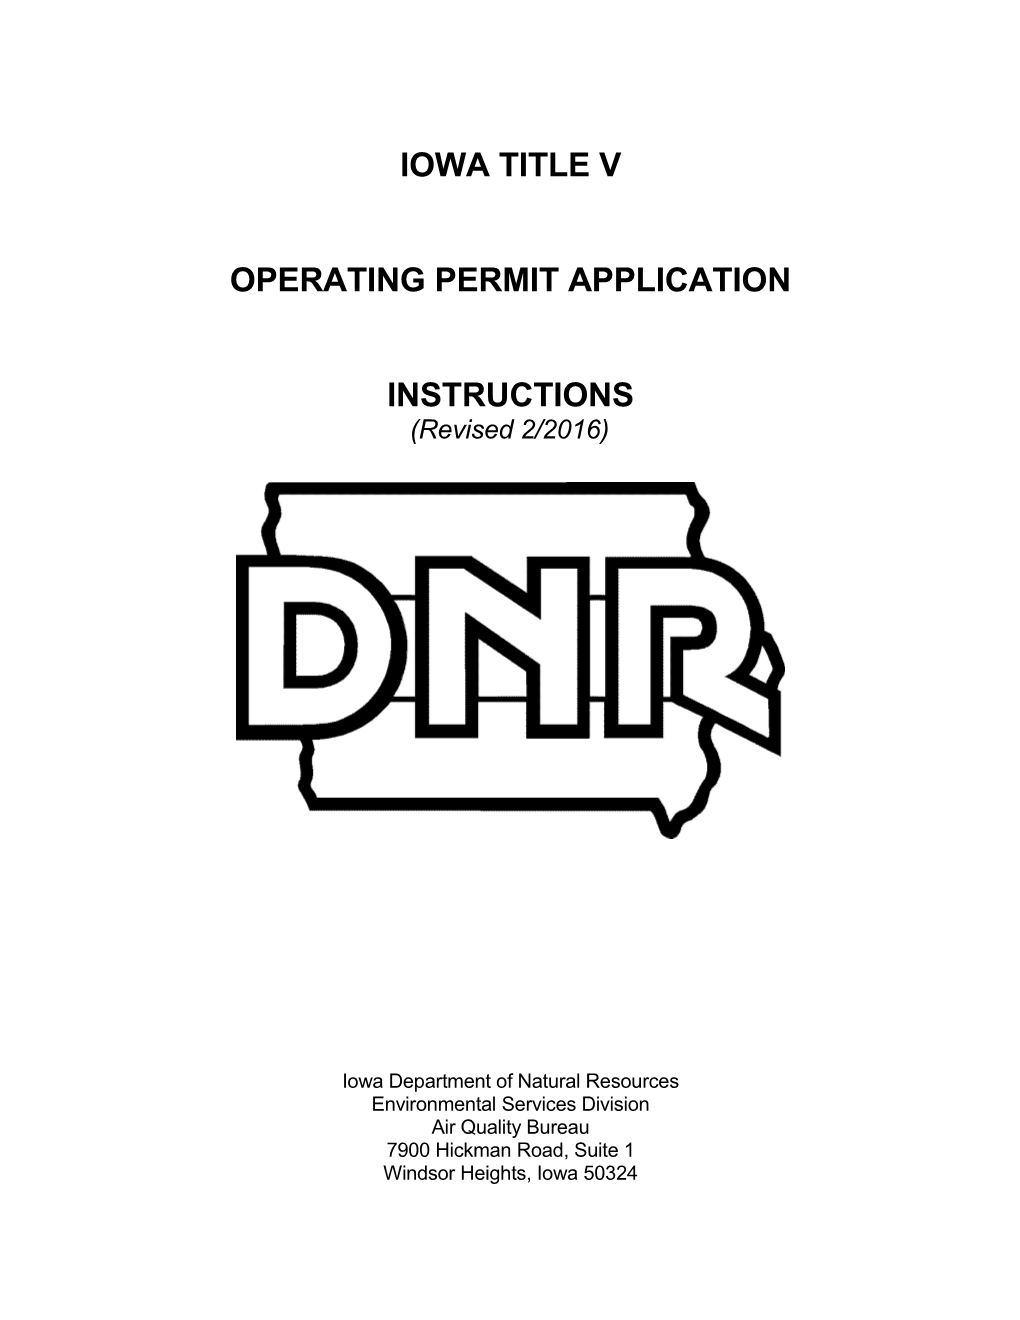 Iowa Title V Operating Permit Application Instructions